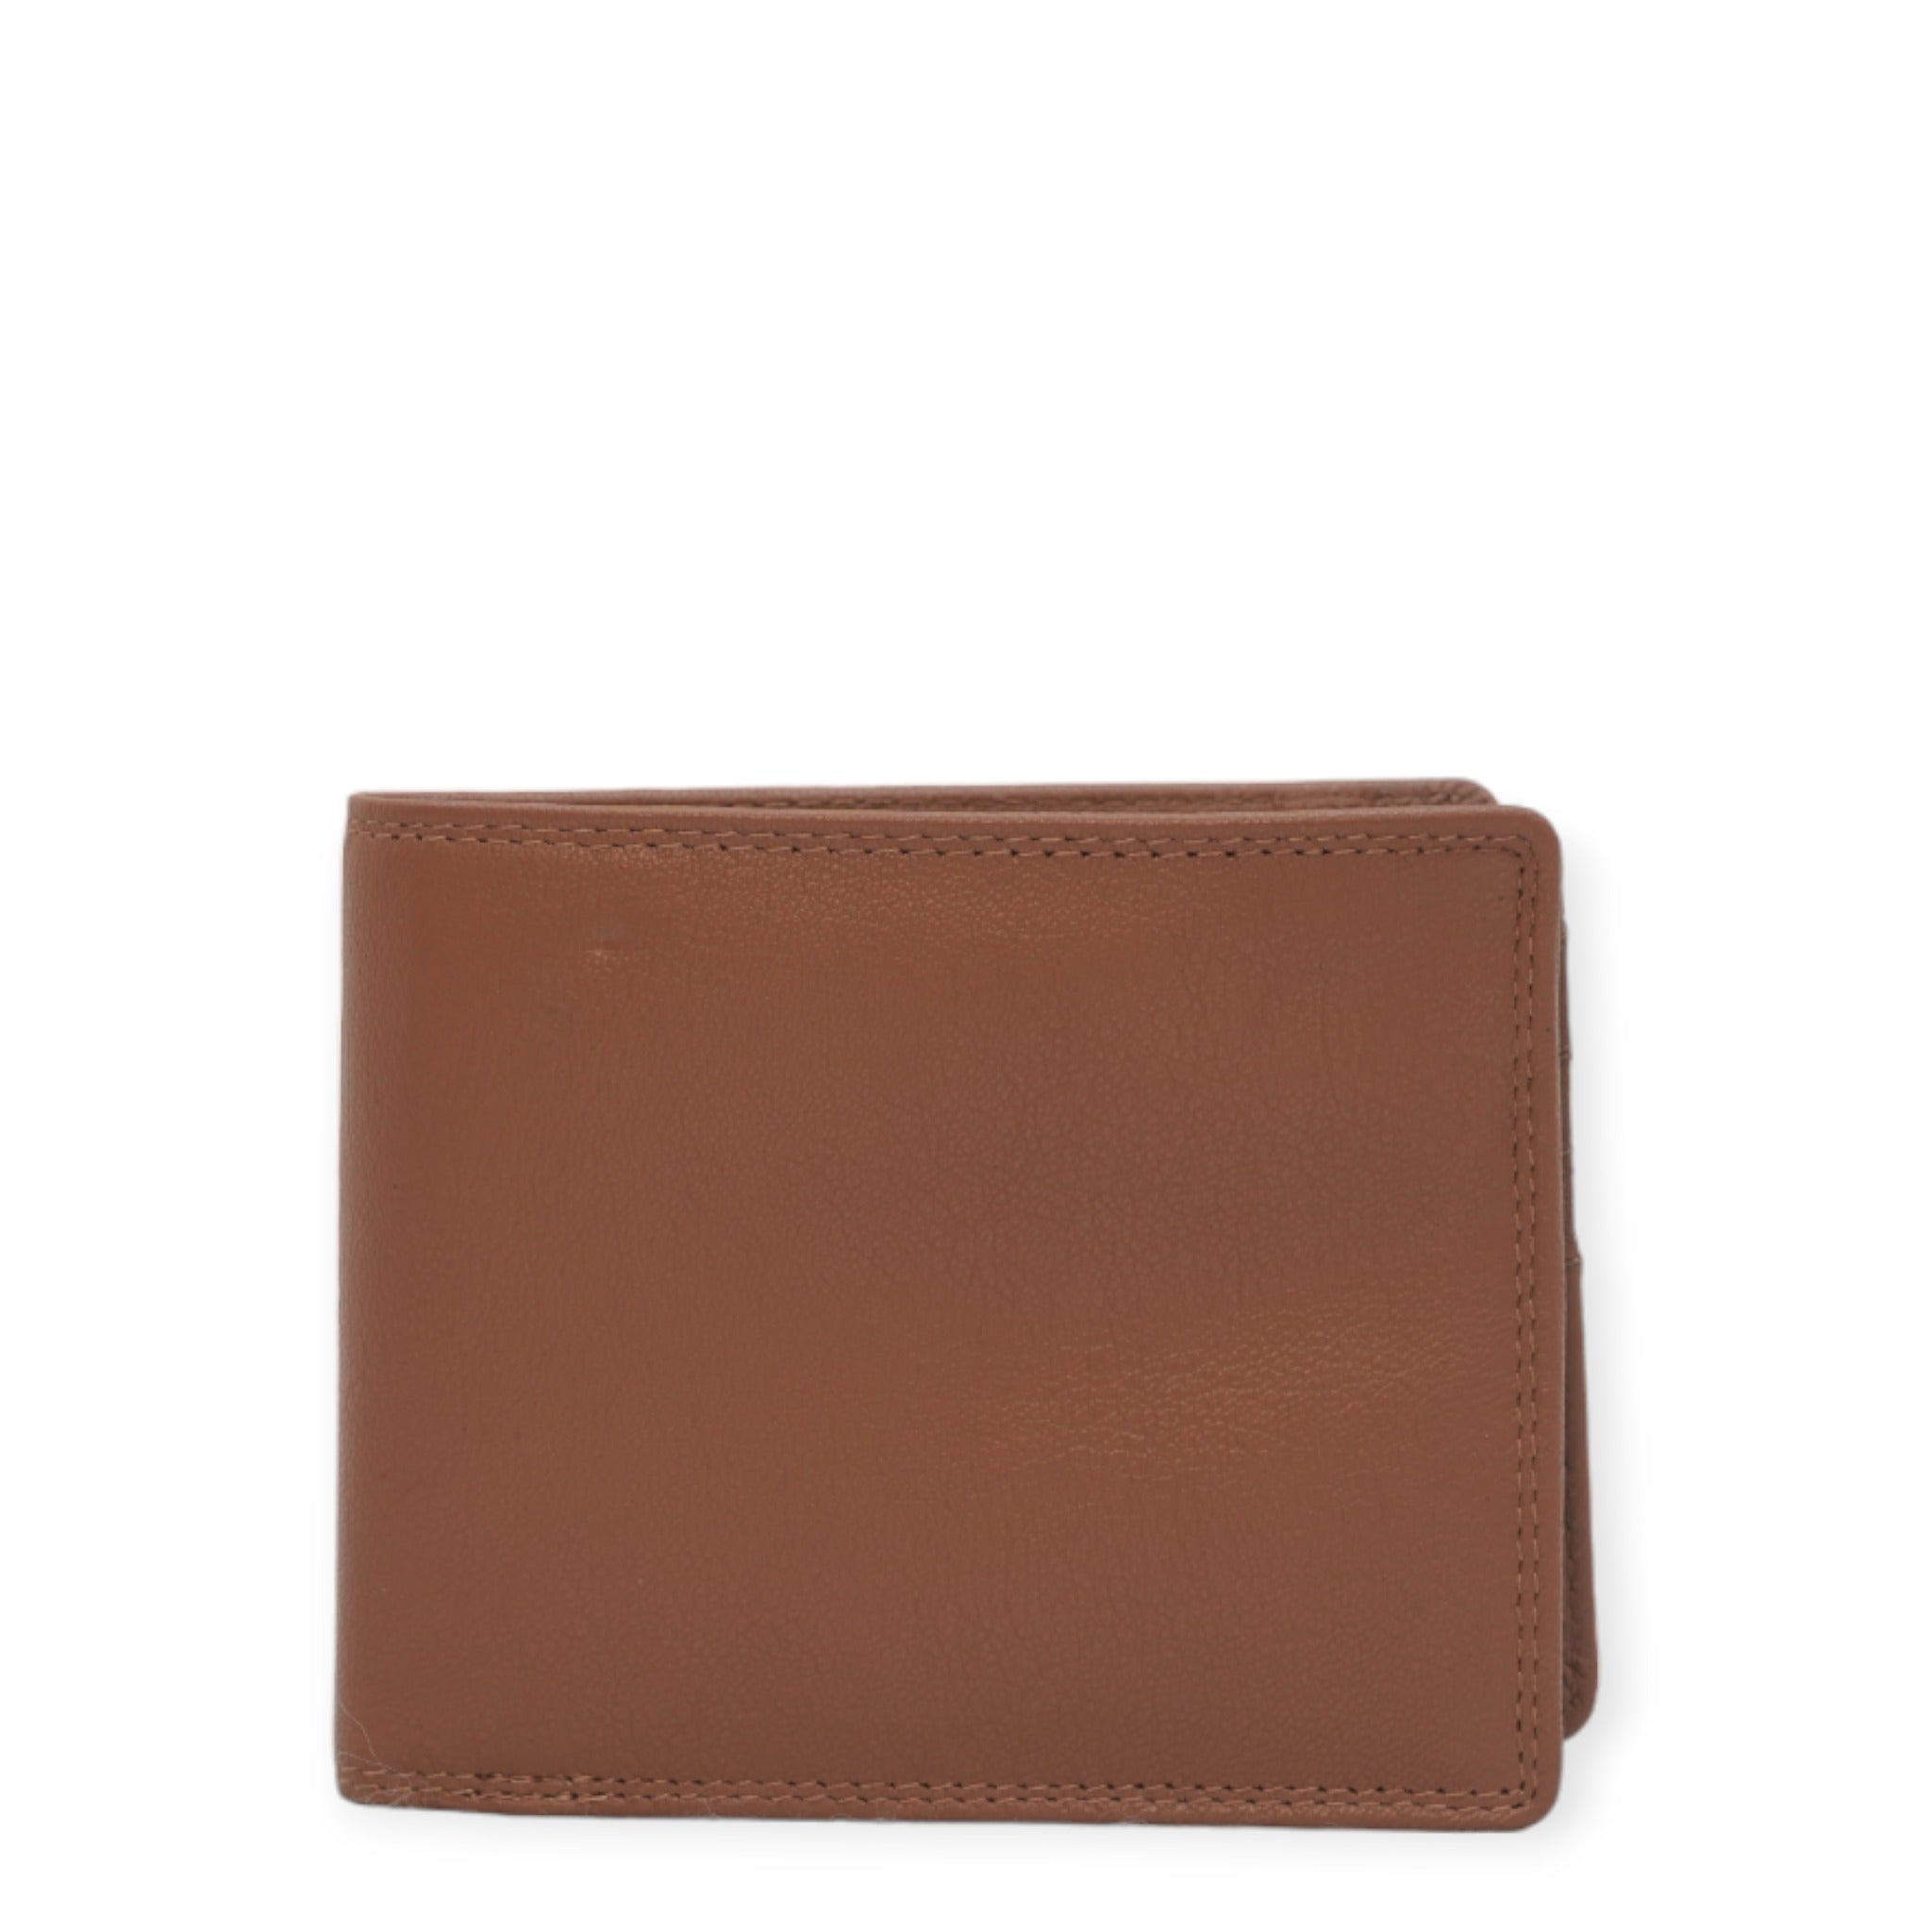 Seira Men's Leather Wallet with Flap Window ID